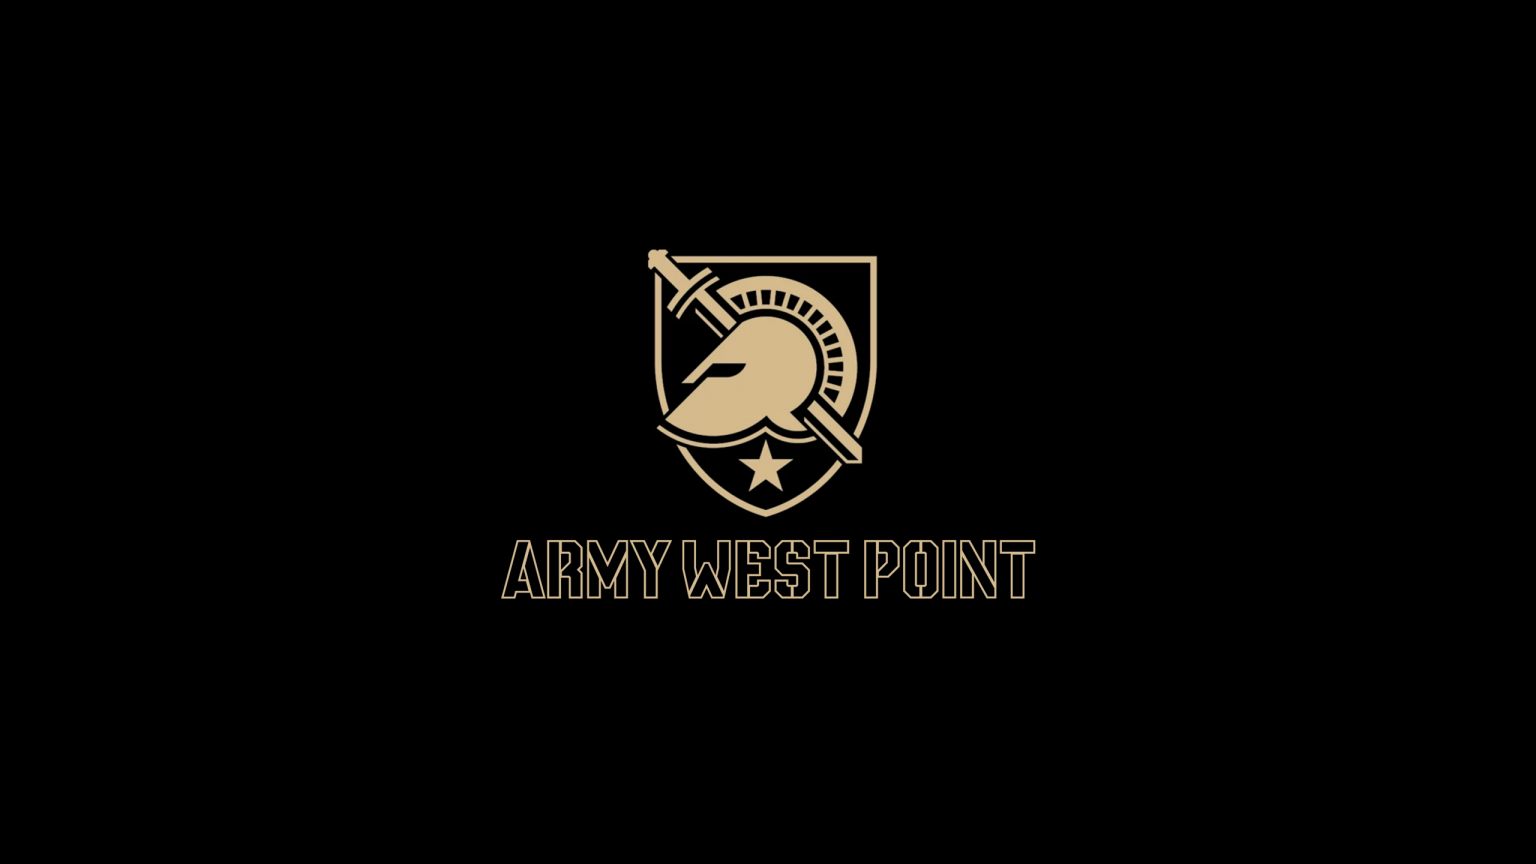 Army Black Knights Football - NCAAF - Square Bettor